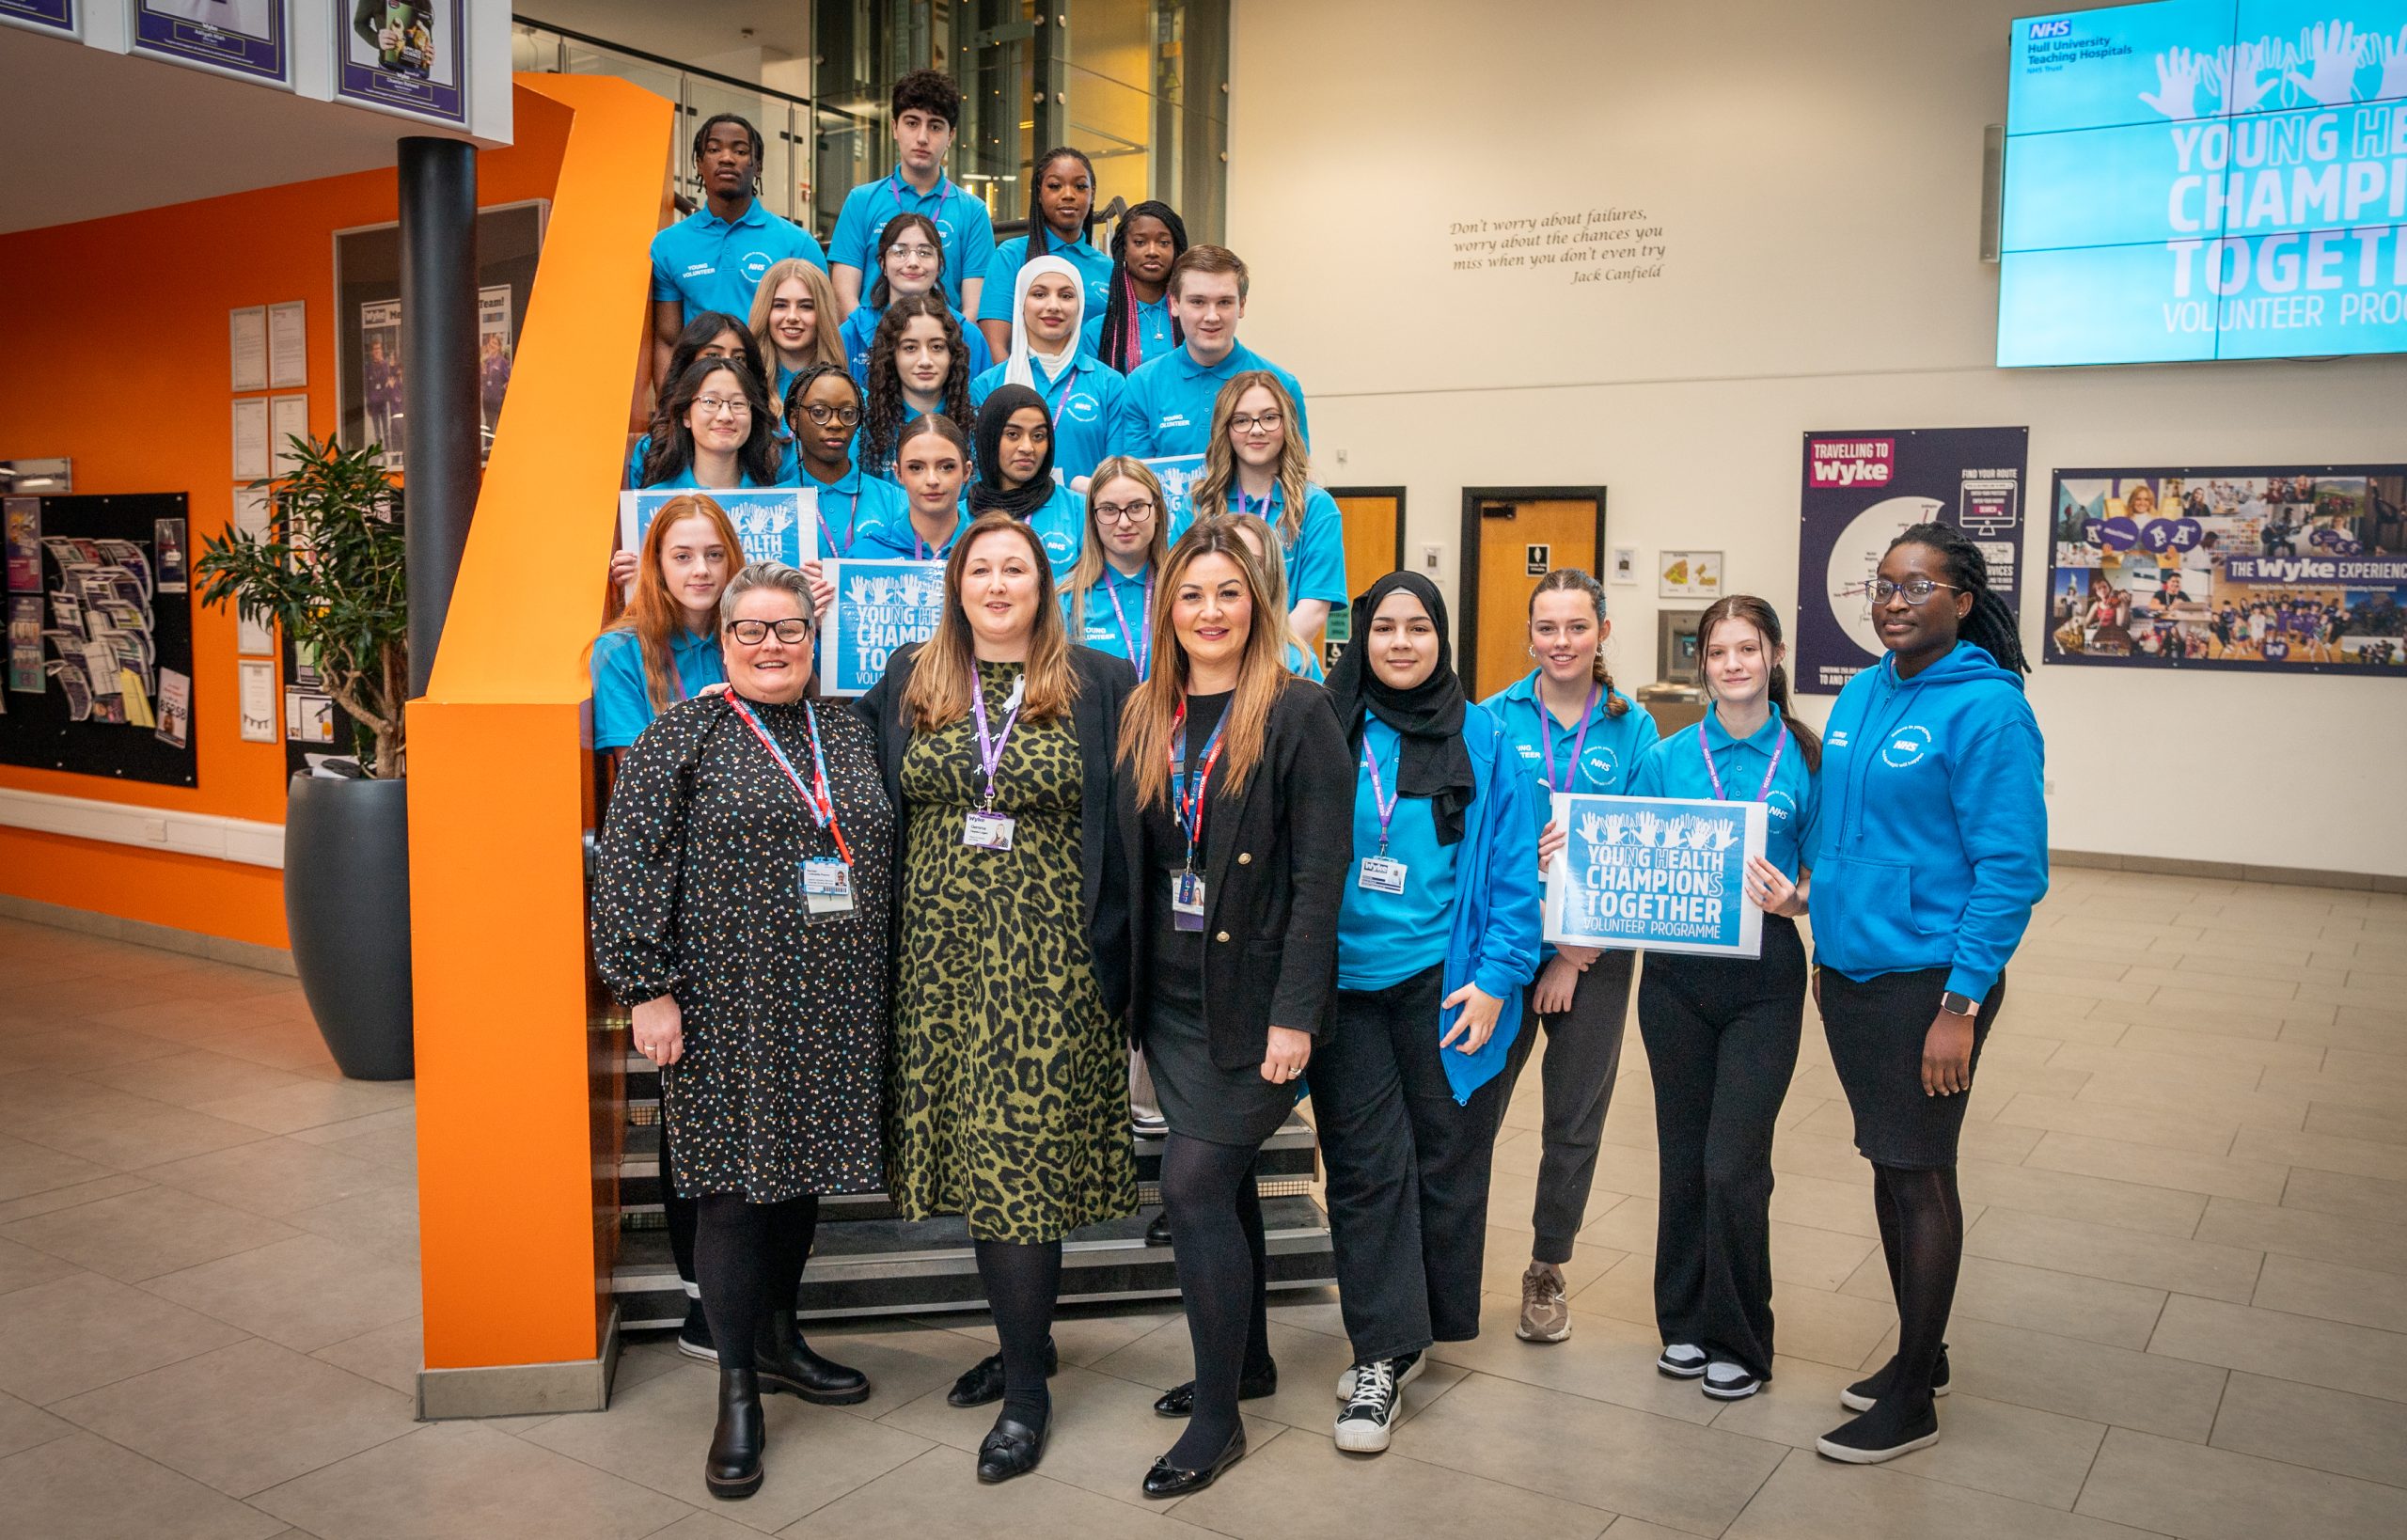 Wyke College students embrace new volunteering project